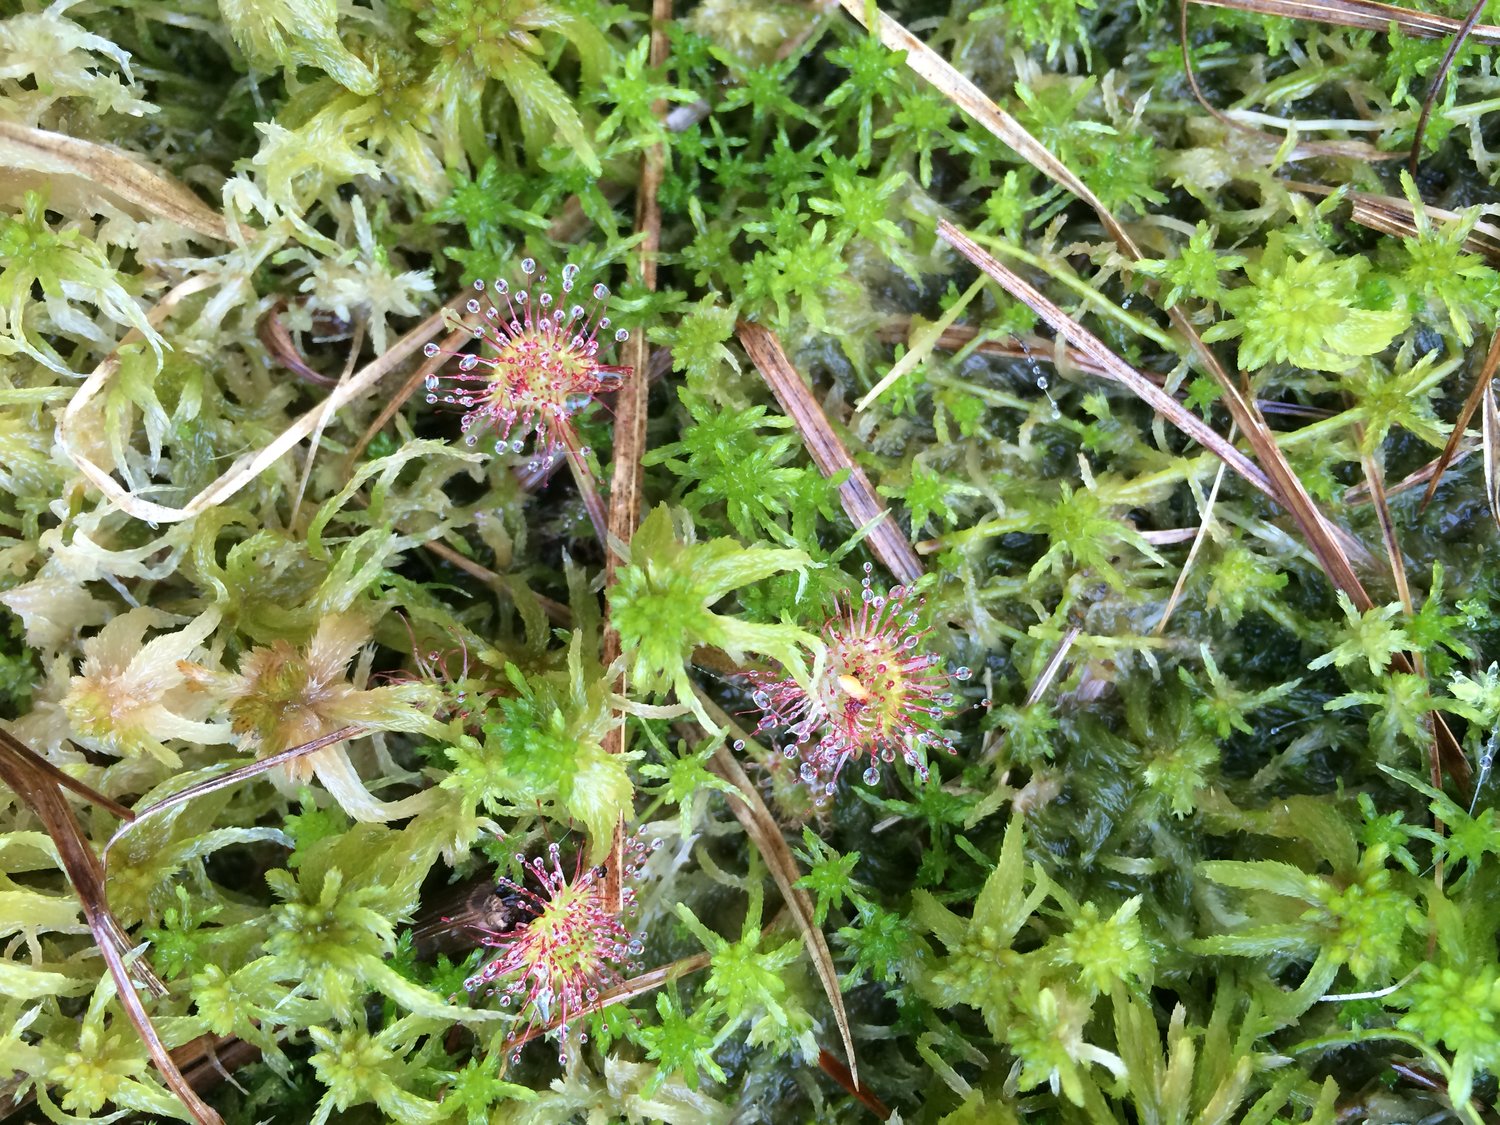 Sundews are aptly named for their resemblance to dewdrops shining in sunlight, and belong to a genera of carnivorous plants containing more than 150 species. The insectivorous plants trap and digest bugs by secreting tiny globules of a sticky enzyme produced by nectar glands on tentacles covering the plant’s leaves.